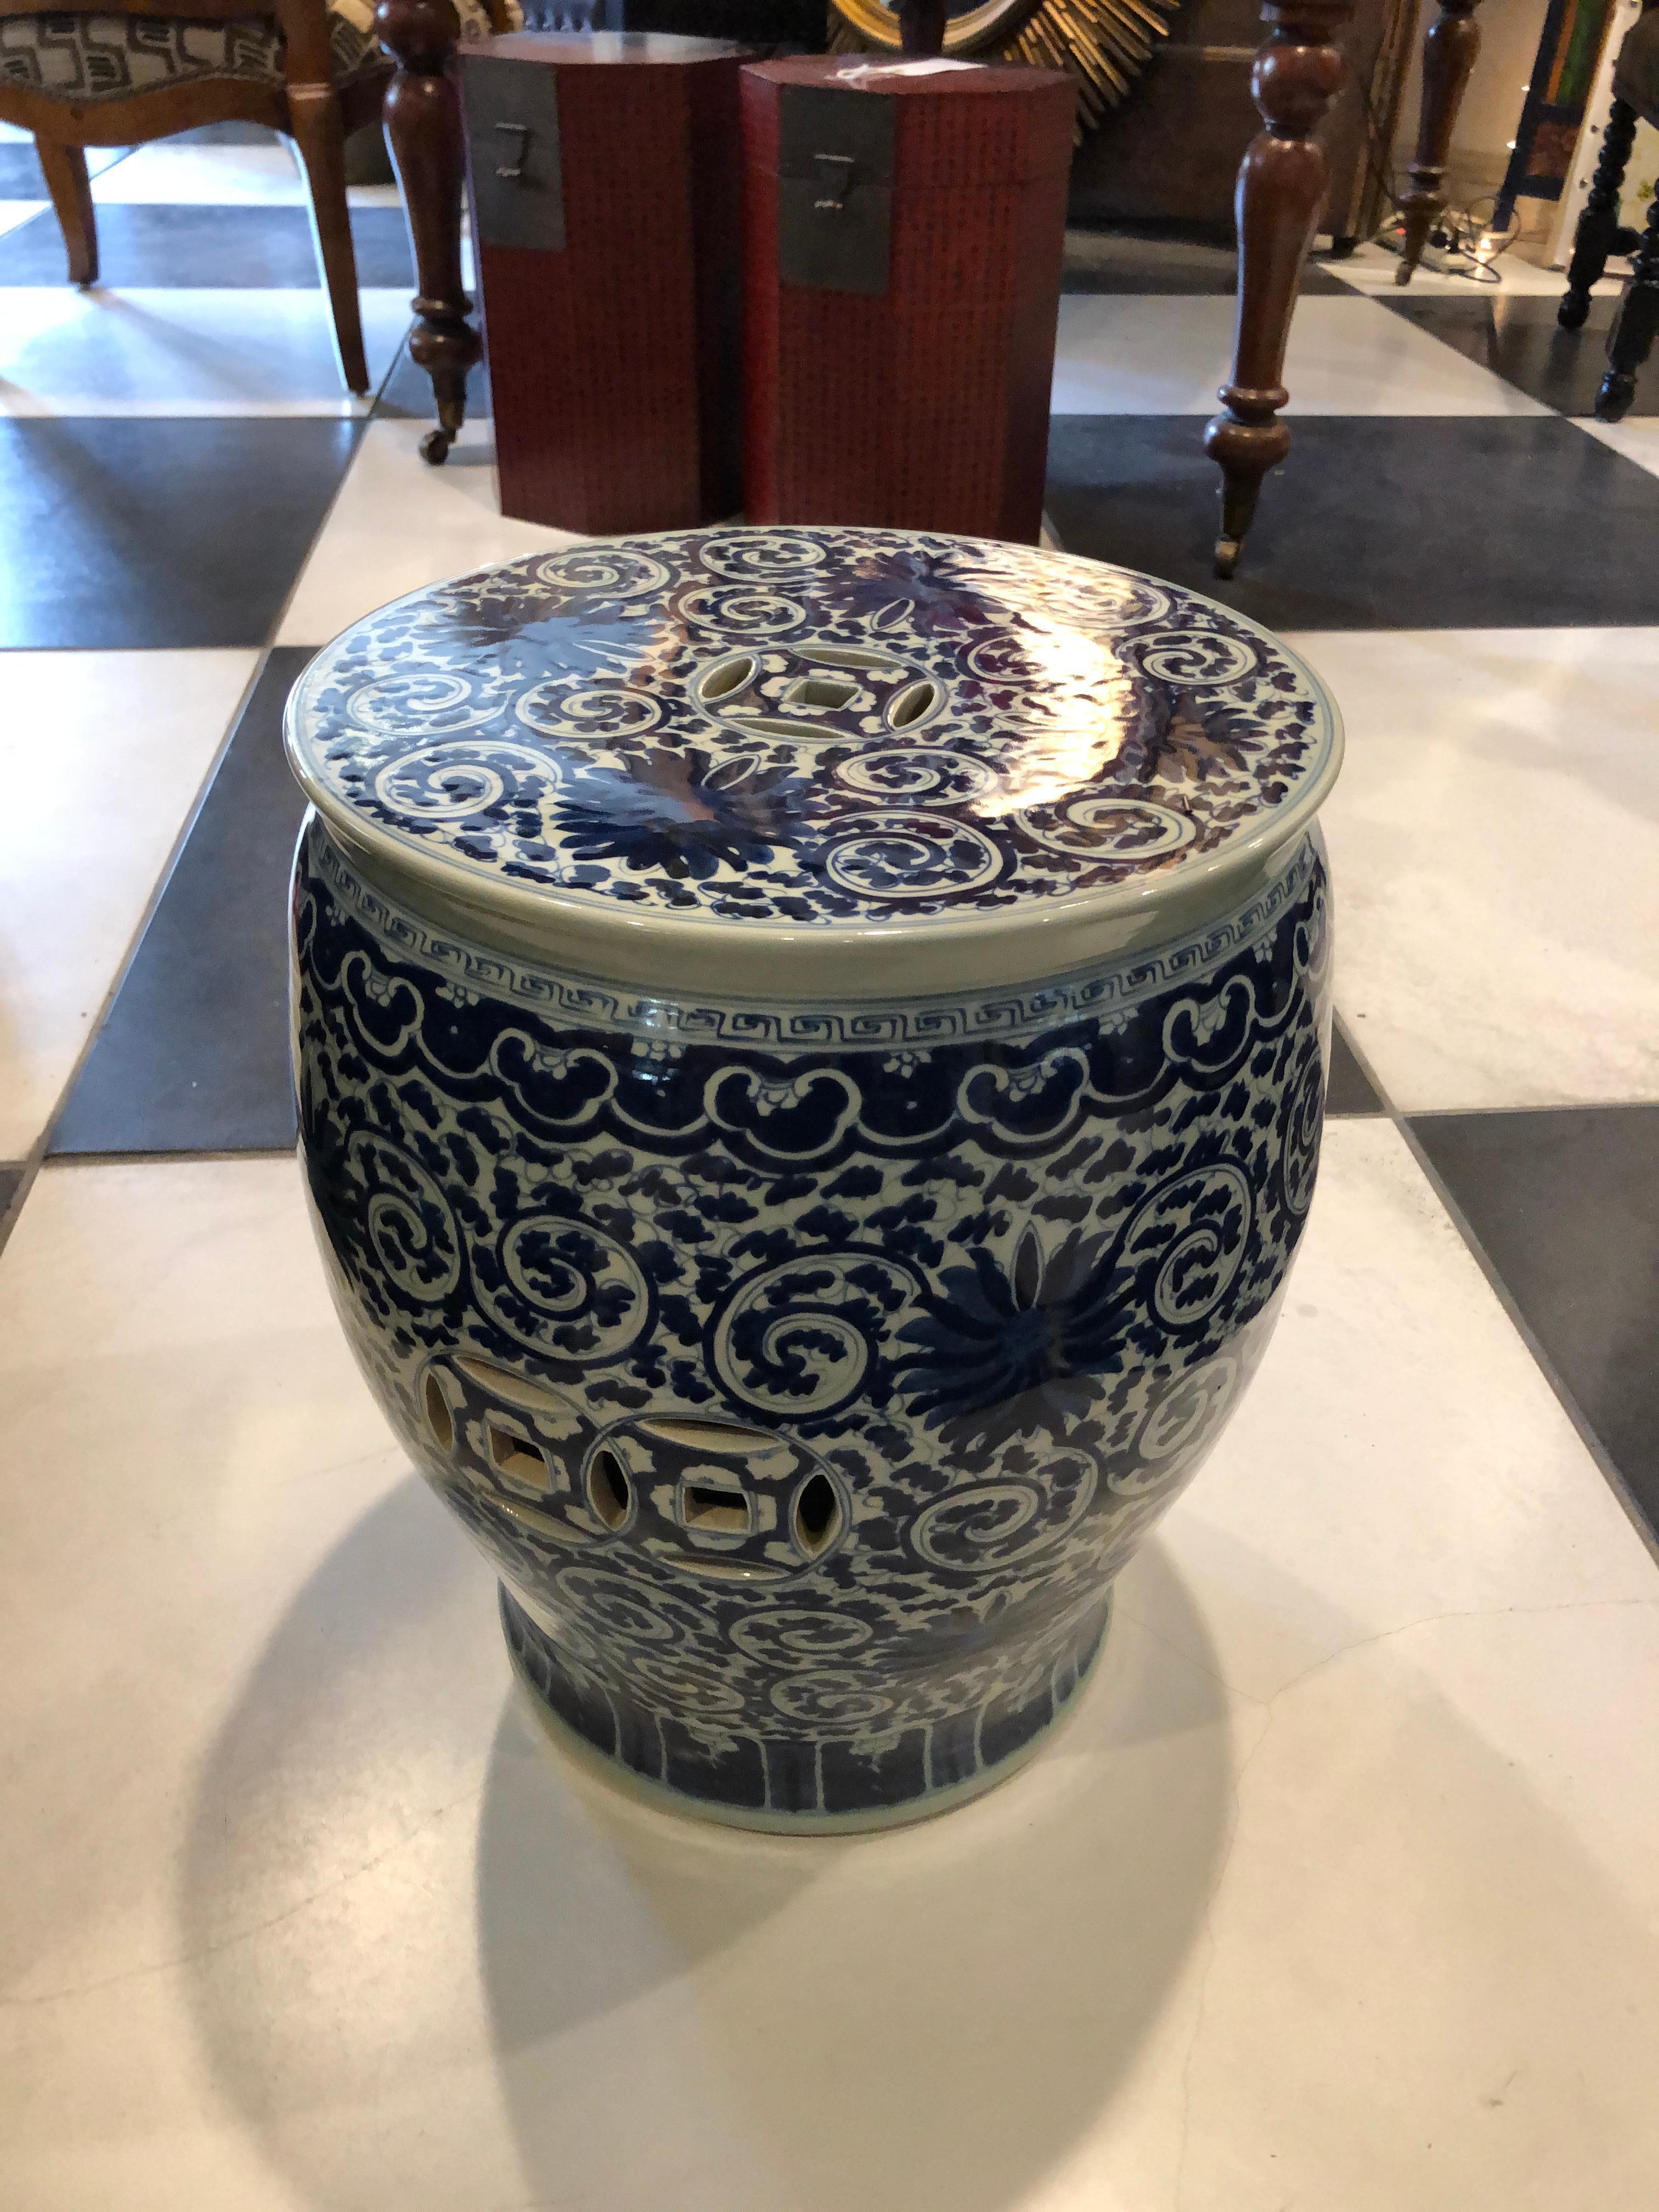 This Chinese Dark Blue & White Garden Seat can be used as an end table or side table made of Porcelain and hand painted in the Chrysanthemum design with 